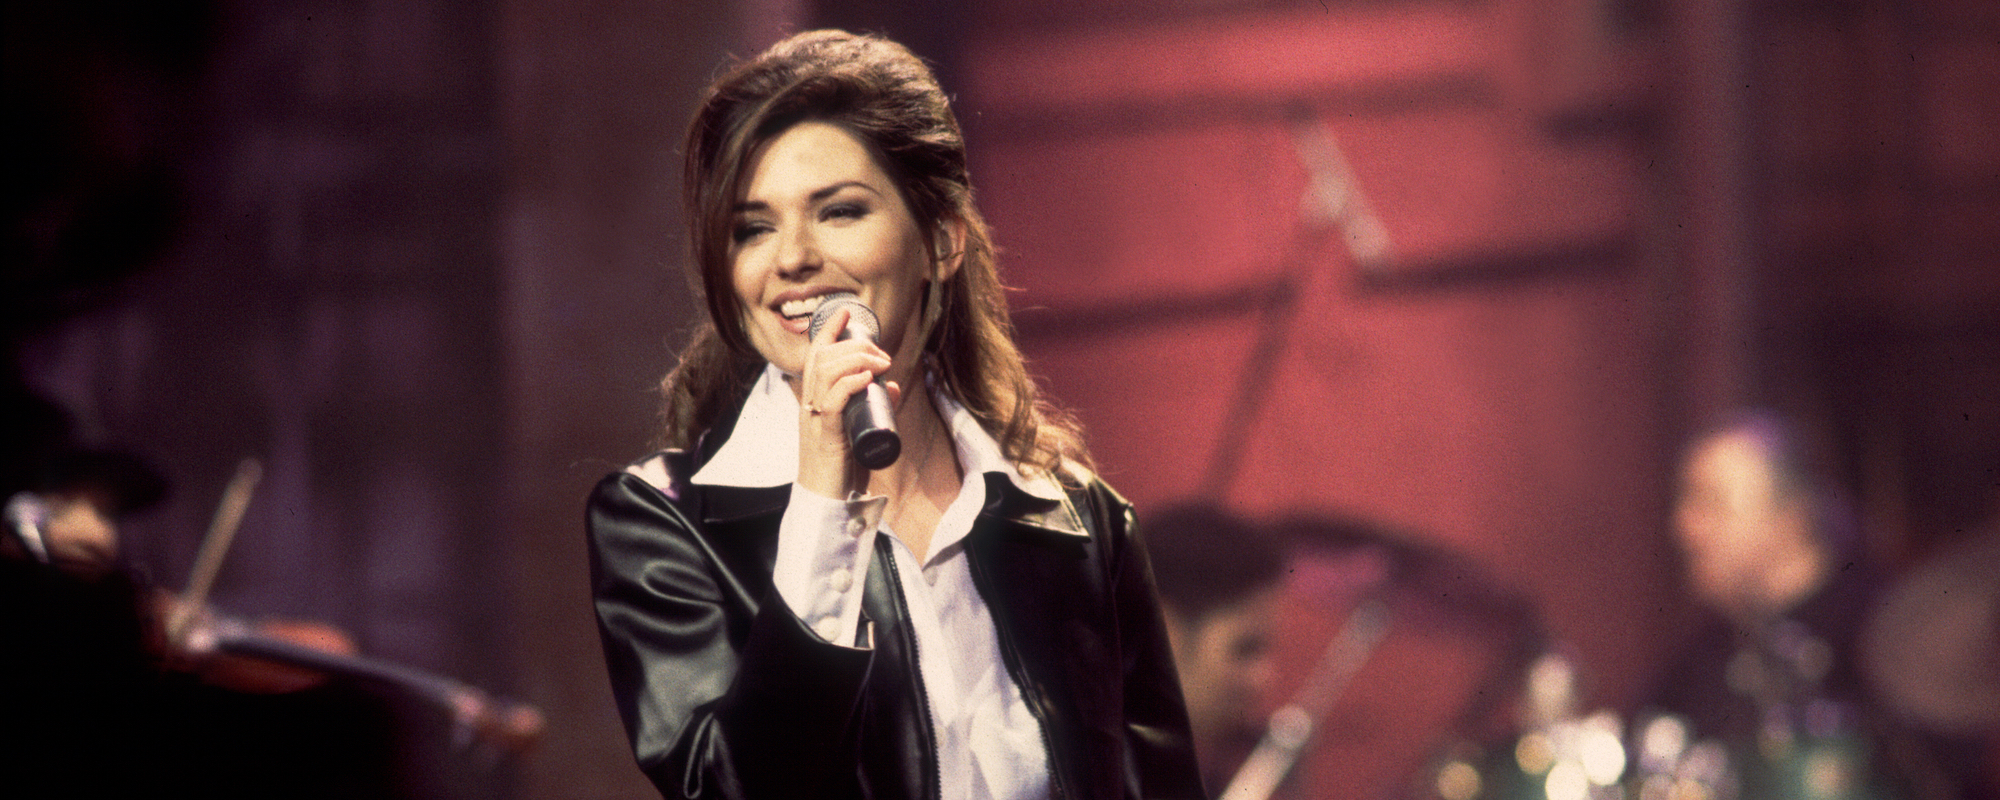 Every Song from Shania Twain’s ‘Come on Over’ Ranked